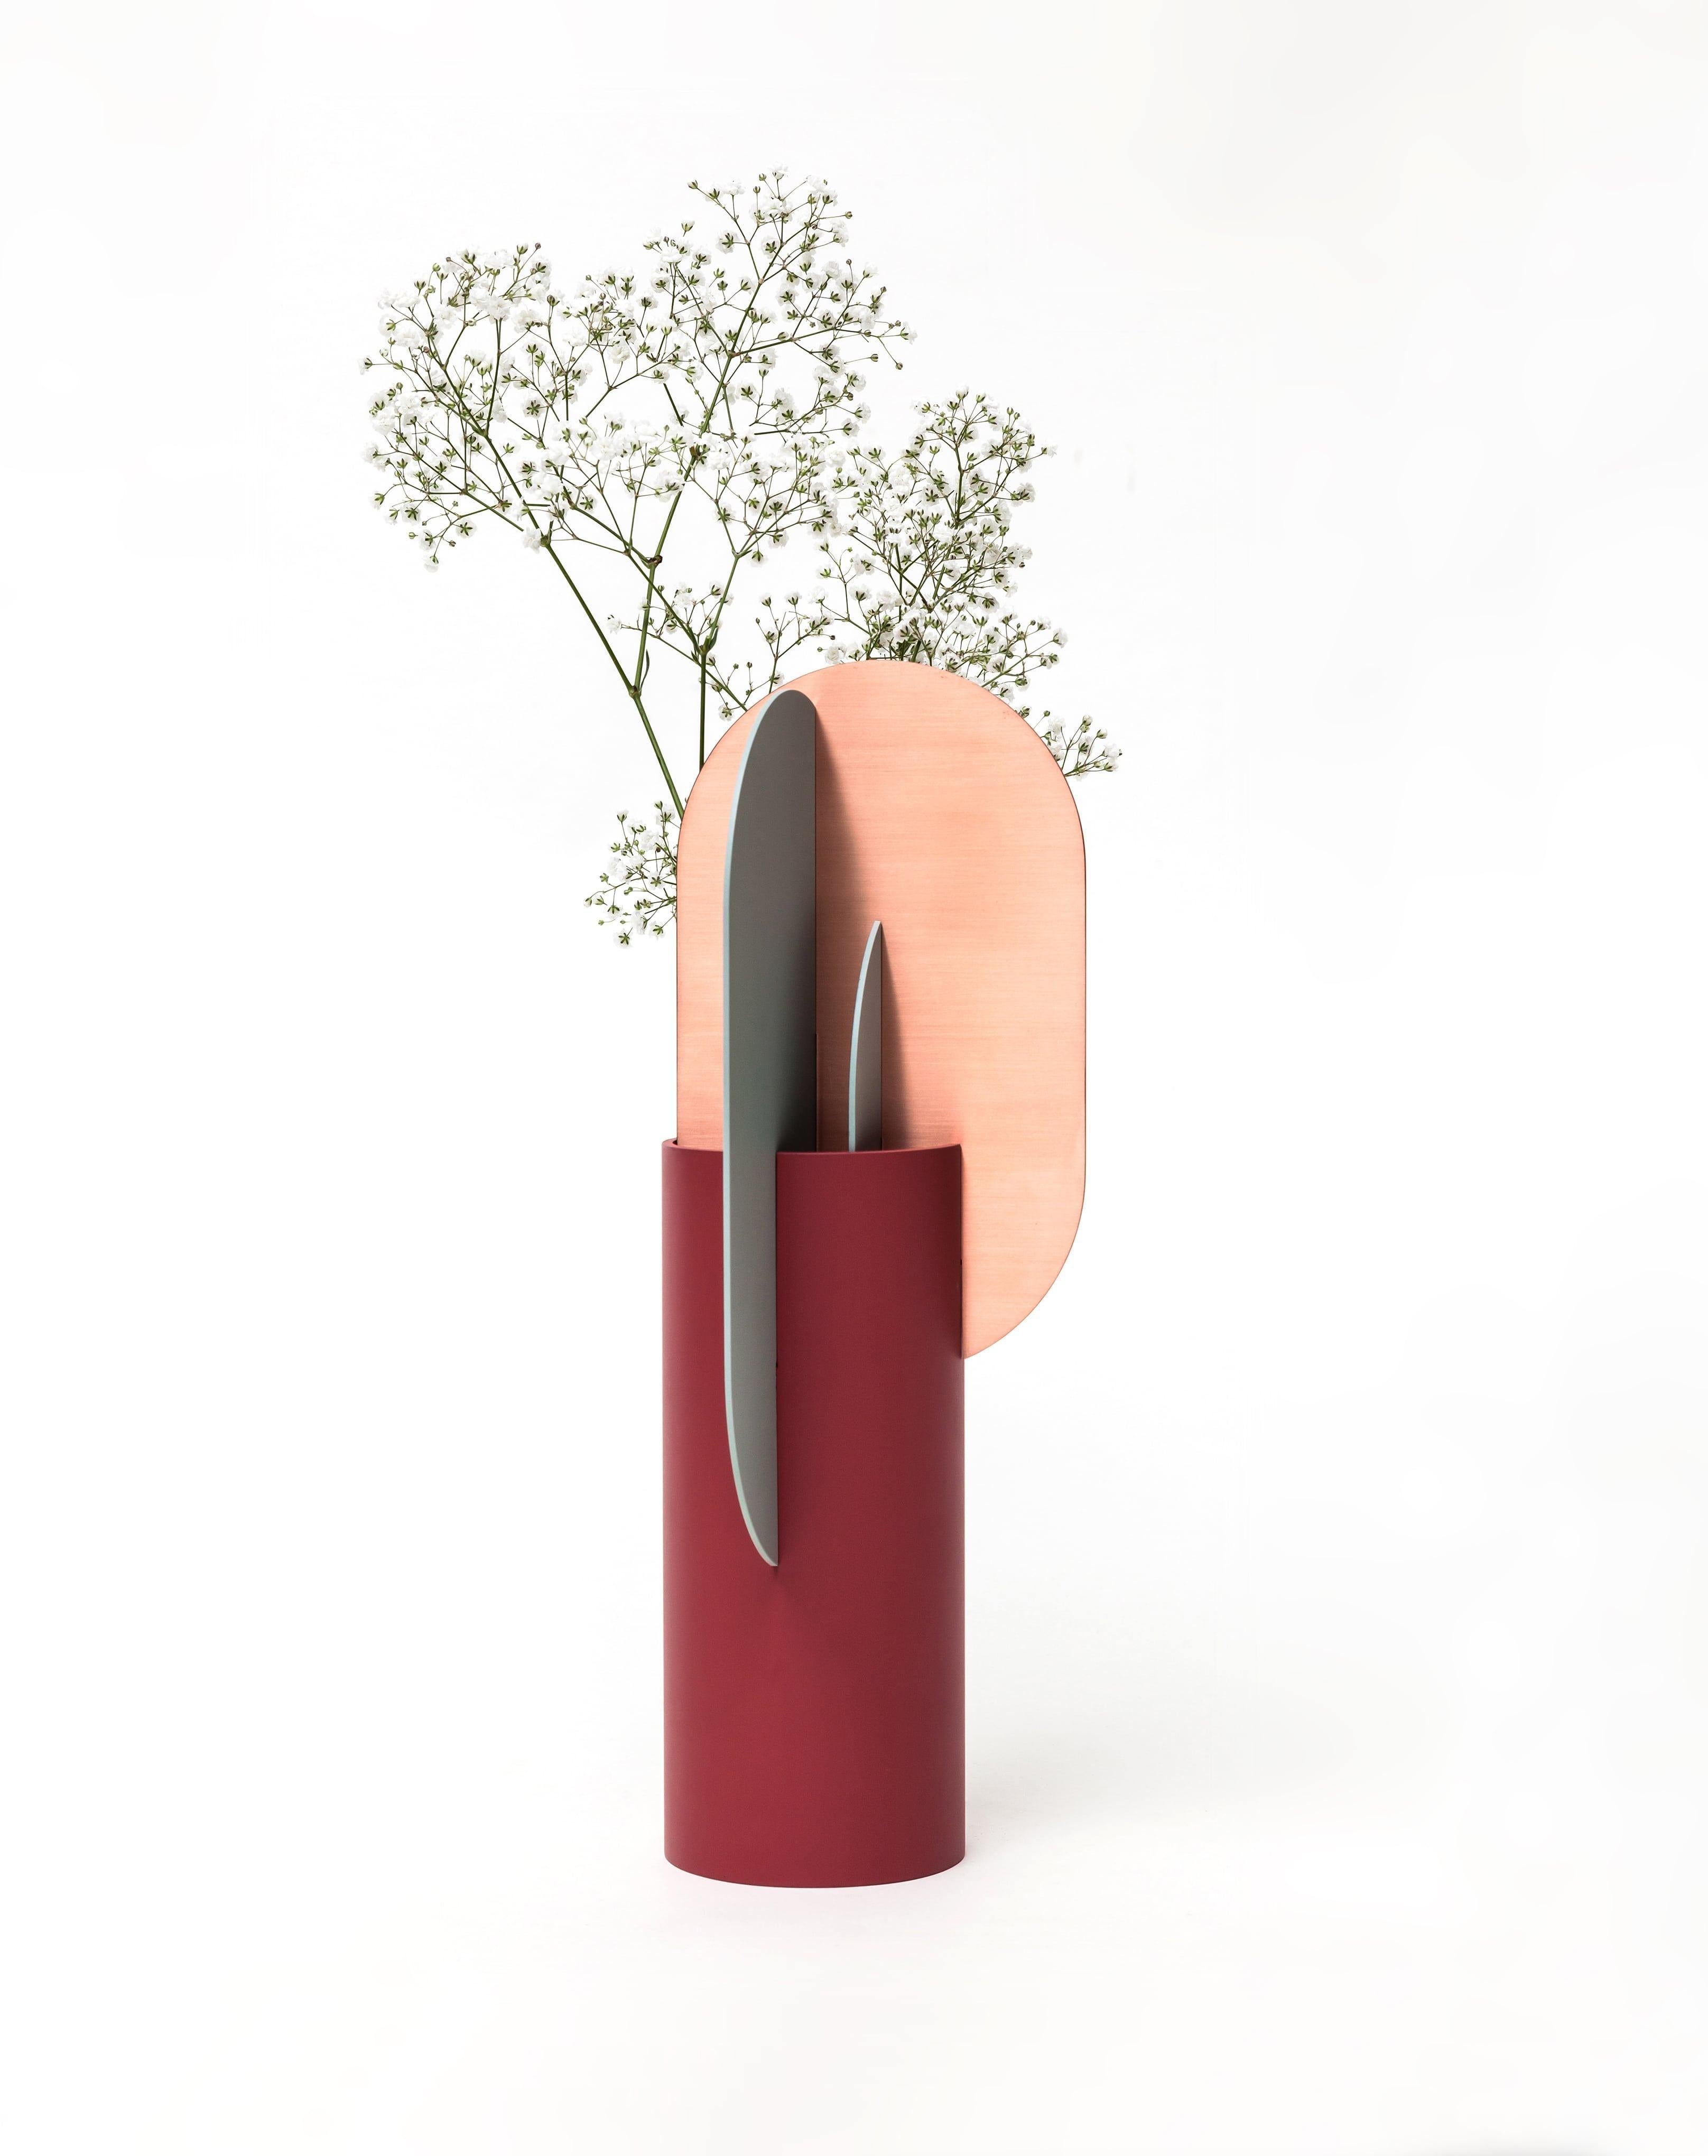 Organic Modern Contemporary Metal Vase 'Ekster CS1' by Noom, Copper and Steel For Sale